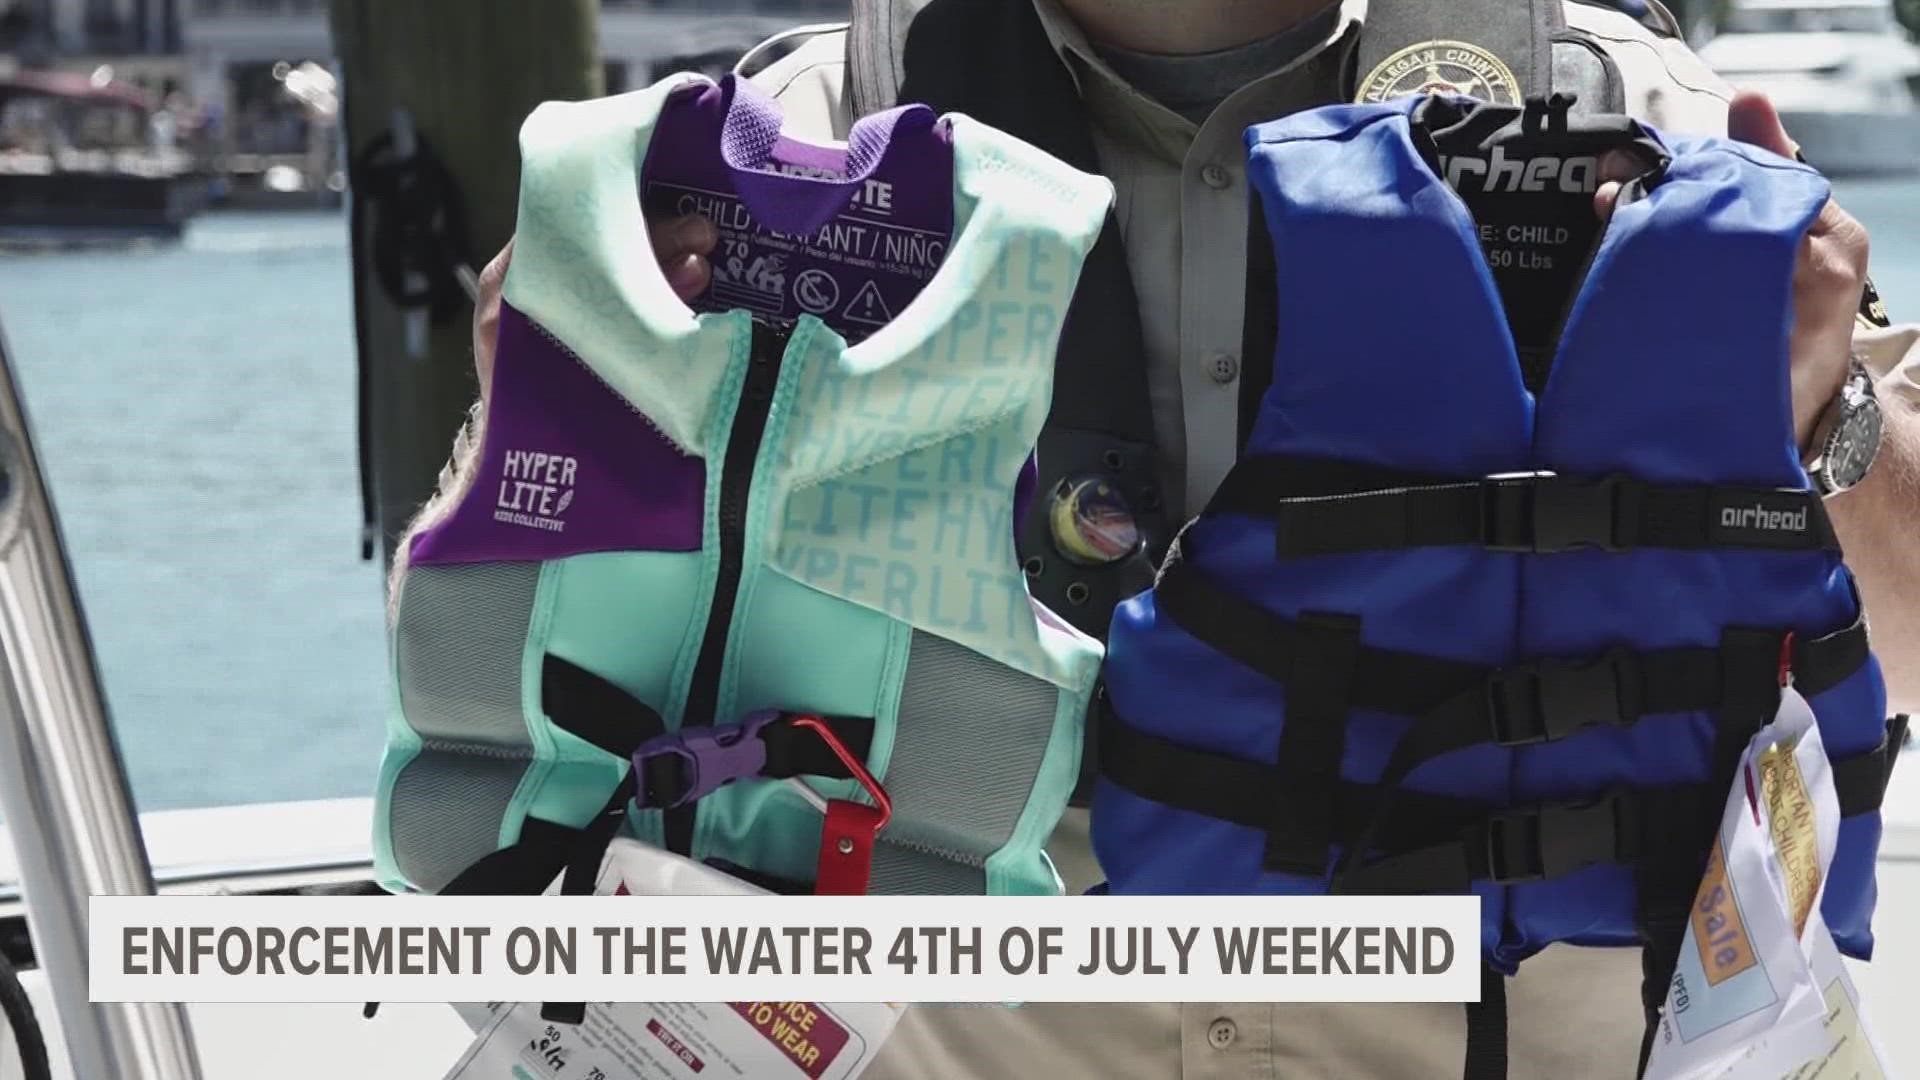 Operation Dry Water is held every year near the Fourth of July holiday, where many boaters take to the water and drinking is prevalent.